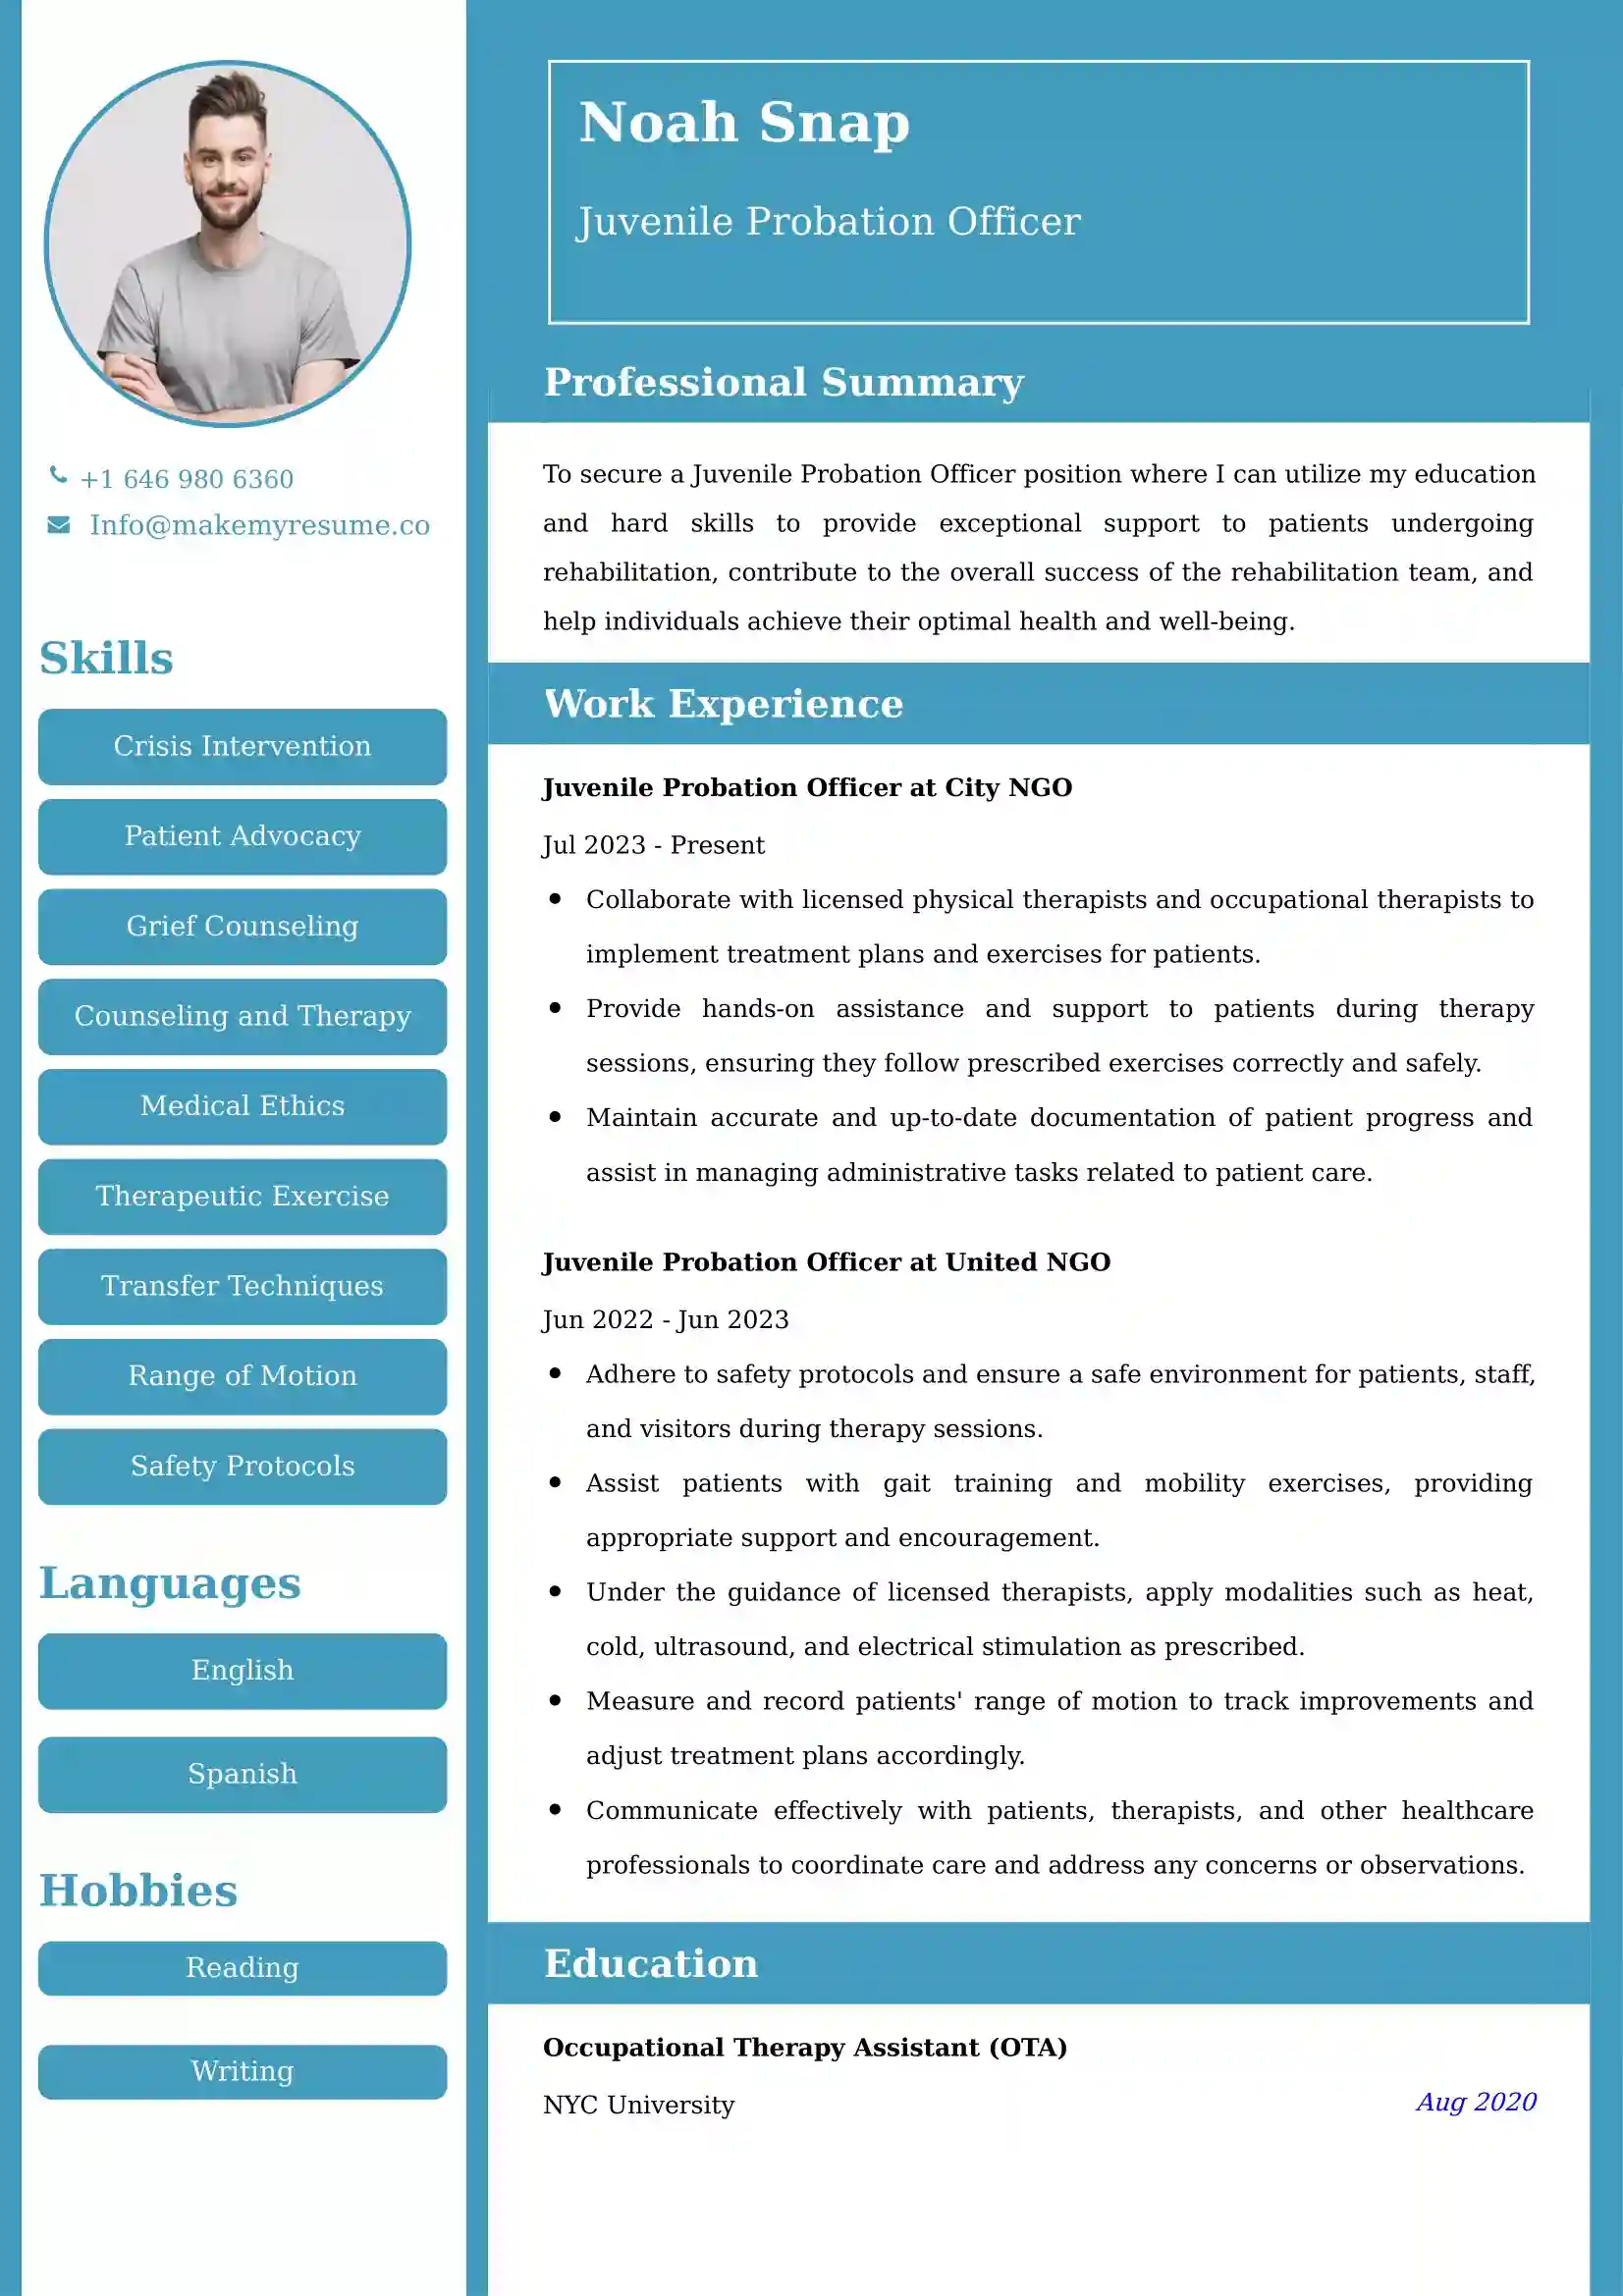 Juvenile Probation Officer Resume Examples - UAE Format and Tips.